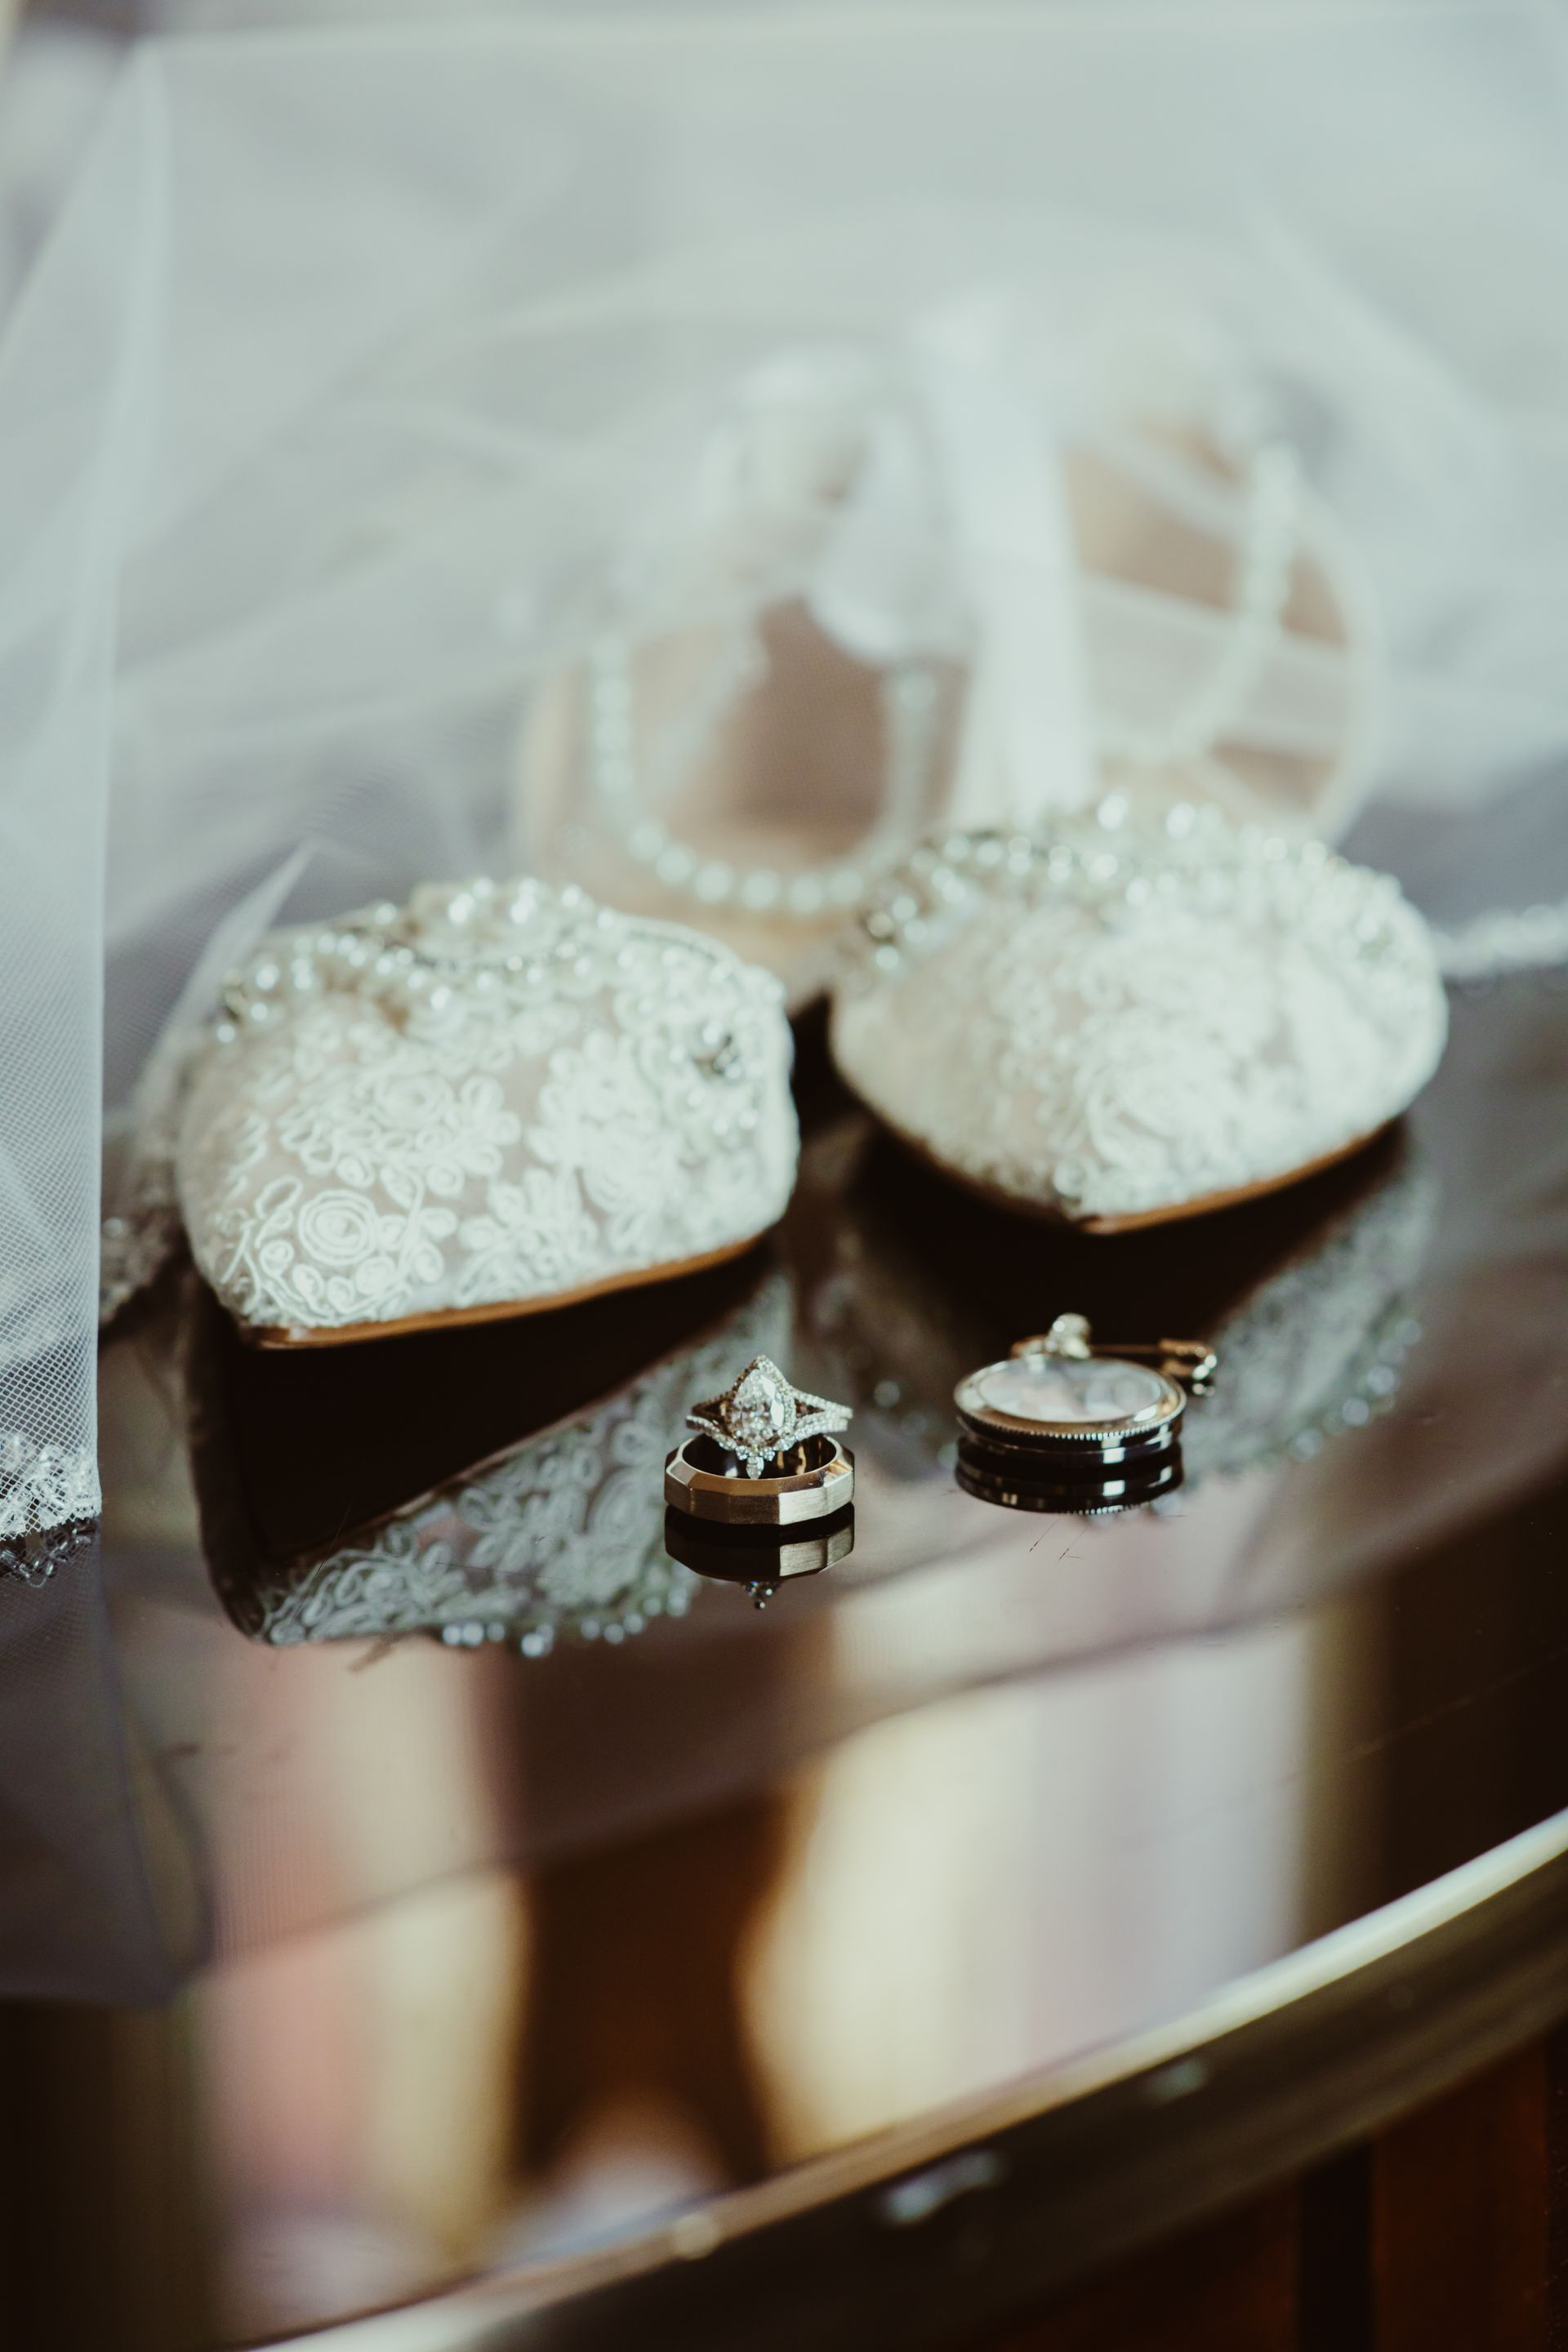 a pair of wedding shoes and wedding rings are sitting on a table .